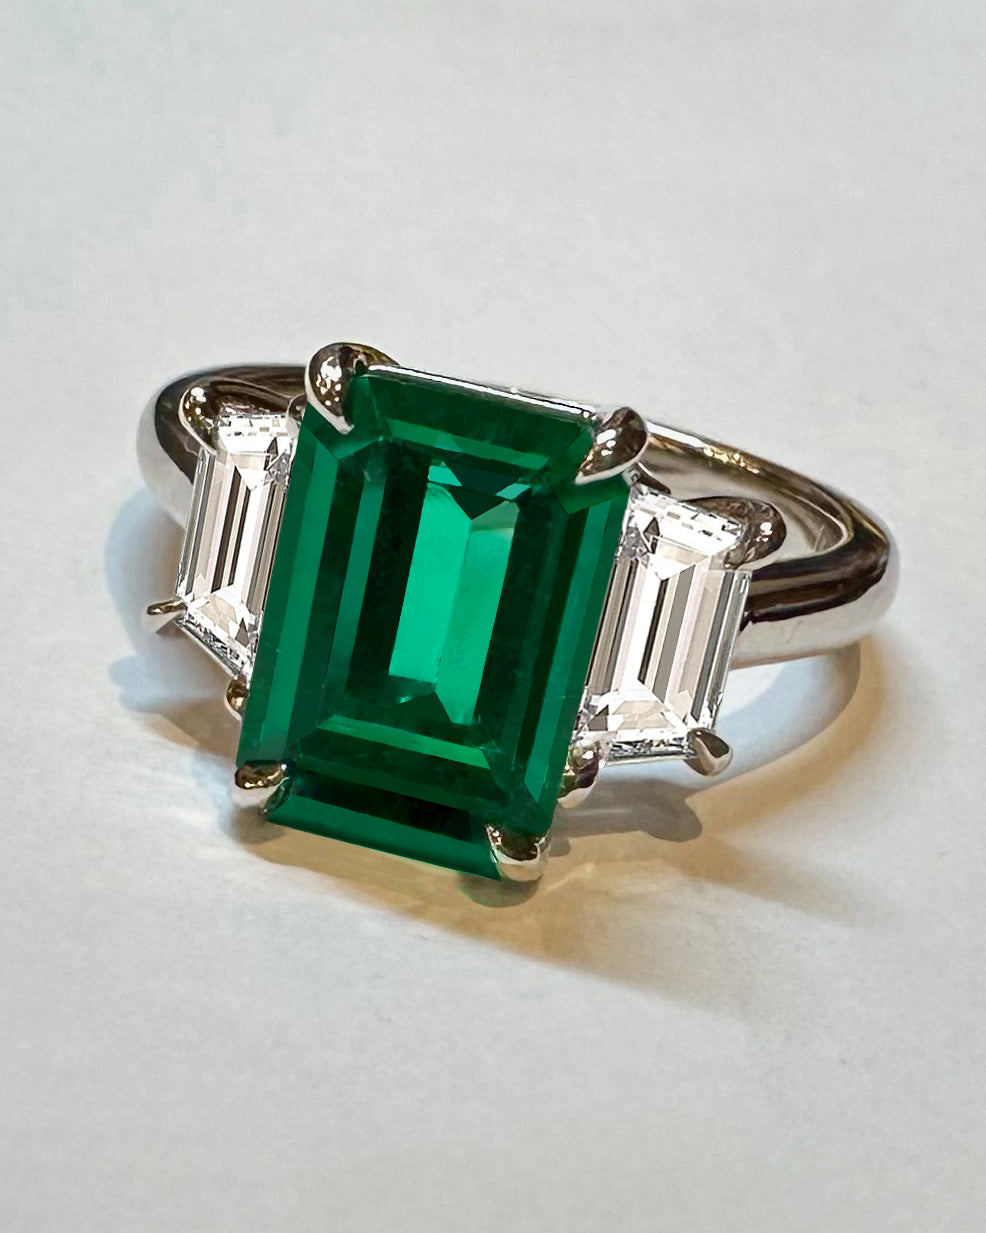 Emerald ring with diamond baguettes on white background.